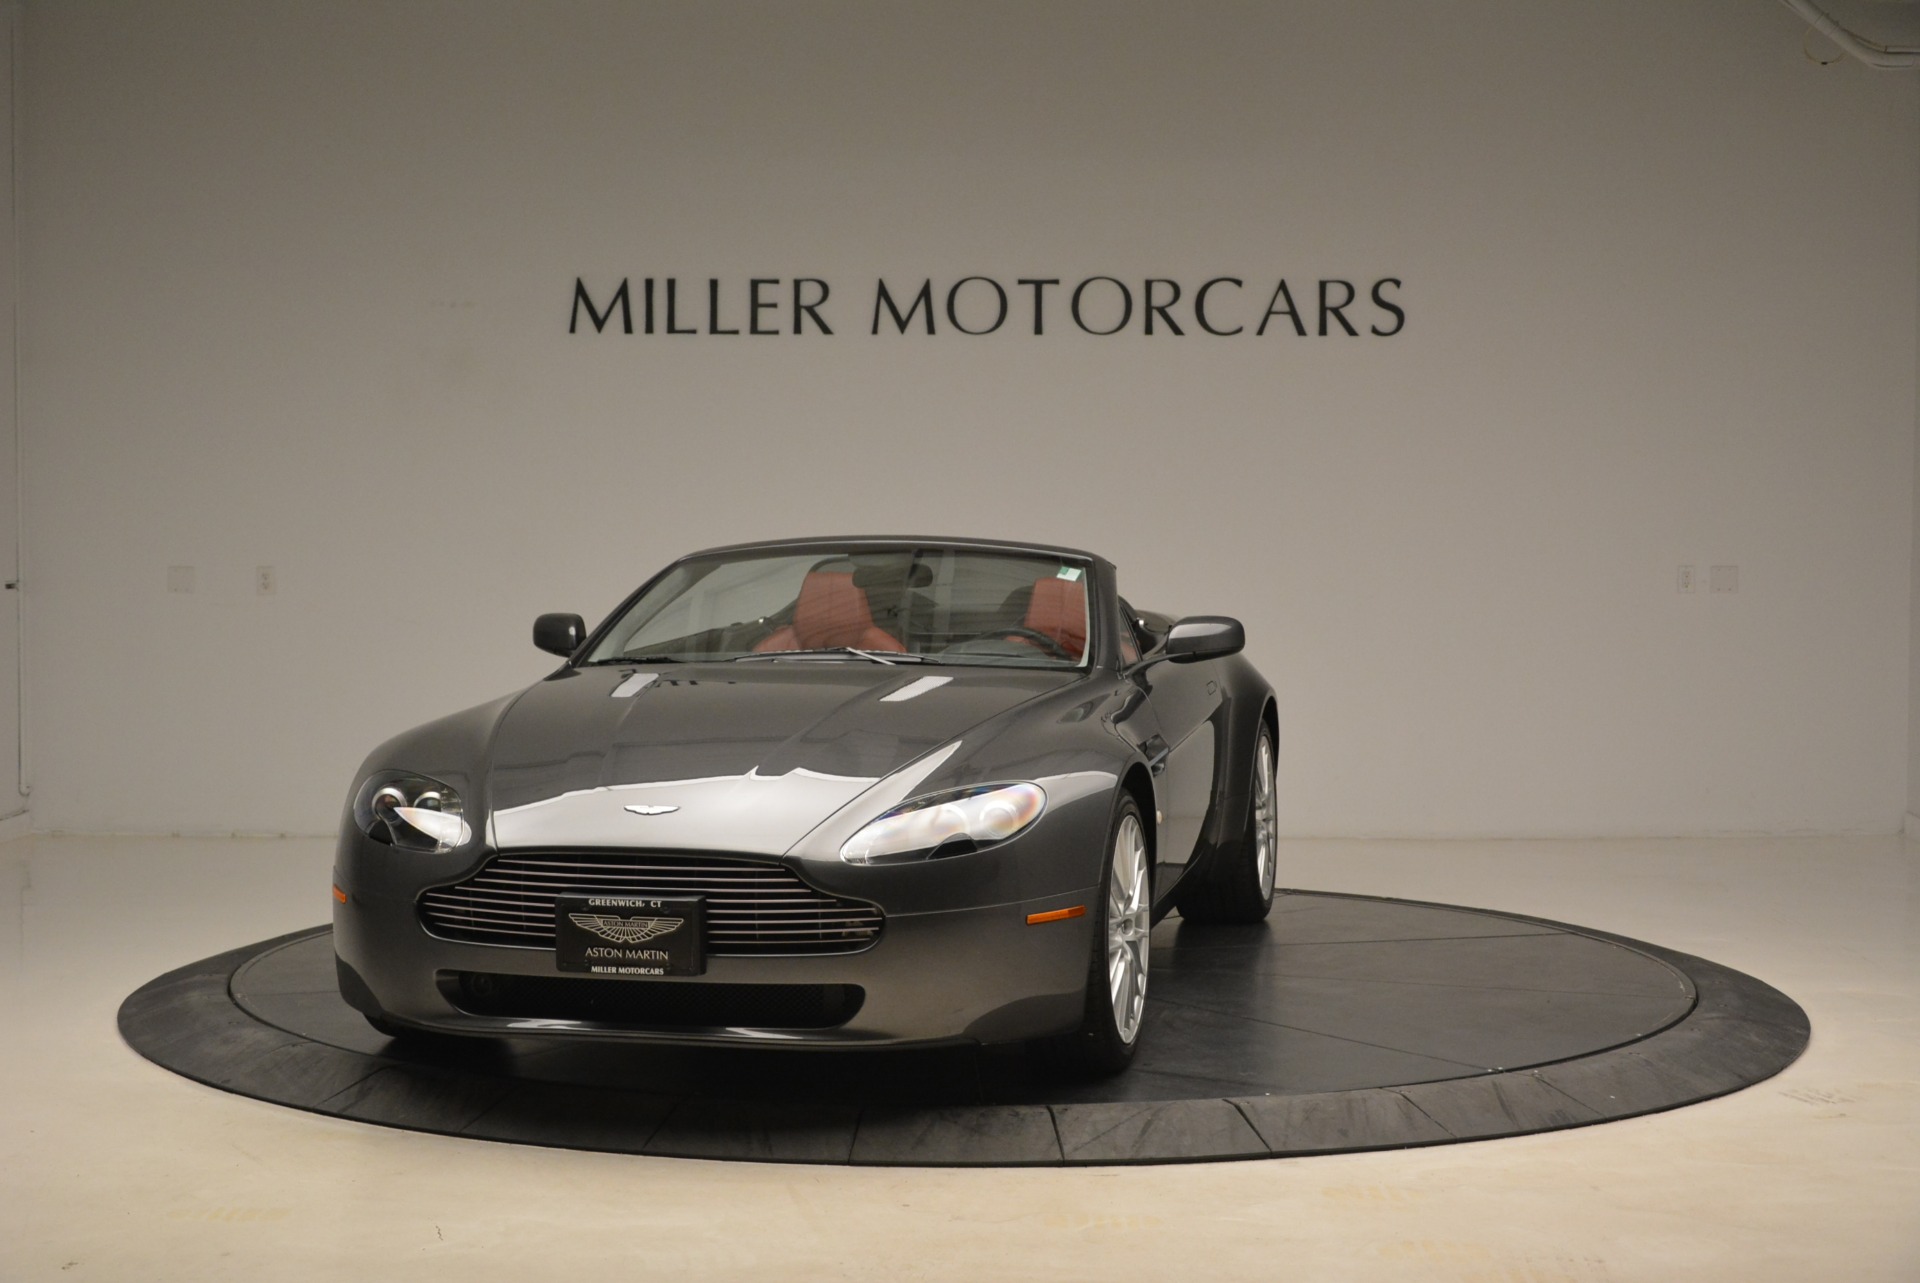 Used 2009 Aston Martin V8 Vantage Roadster for sale Sold at Bentley Greenwich in Greenwich CT 06830 1